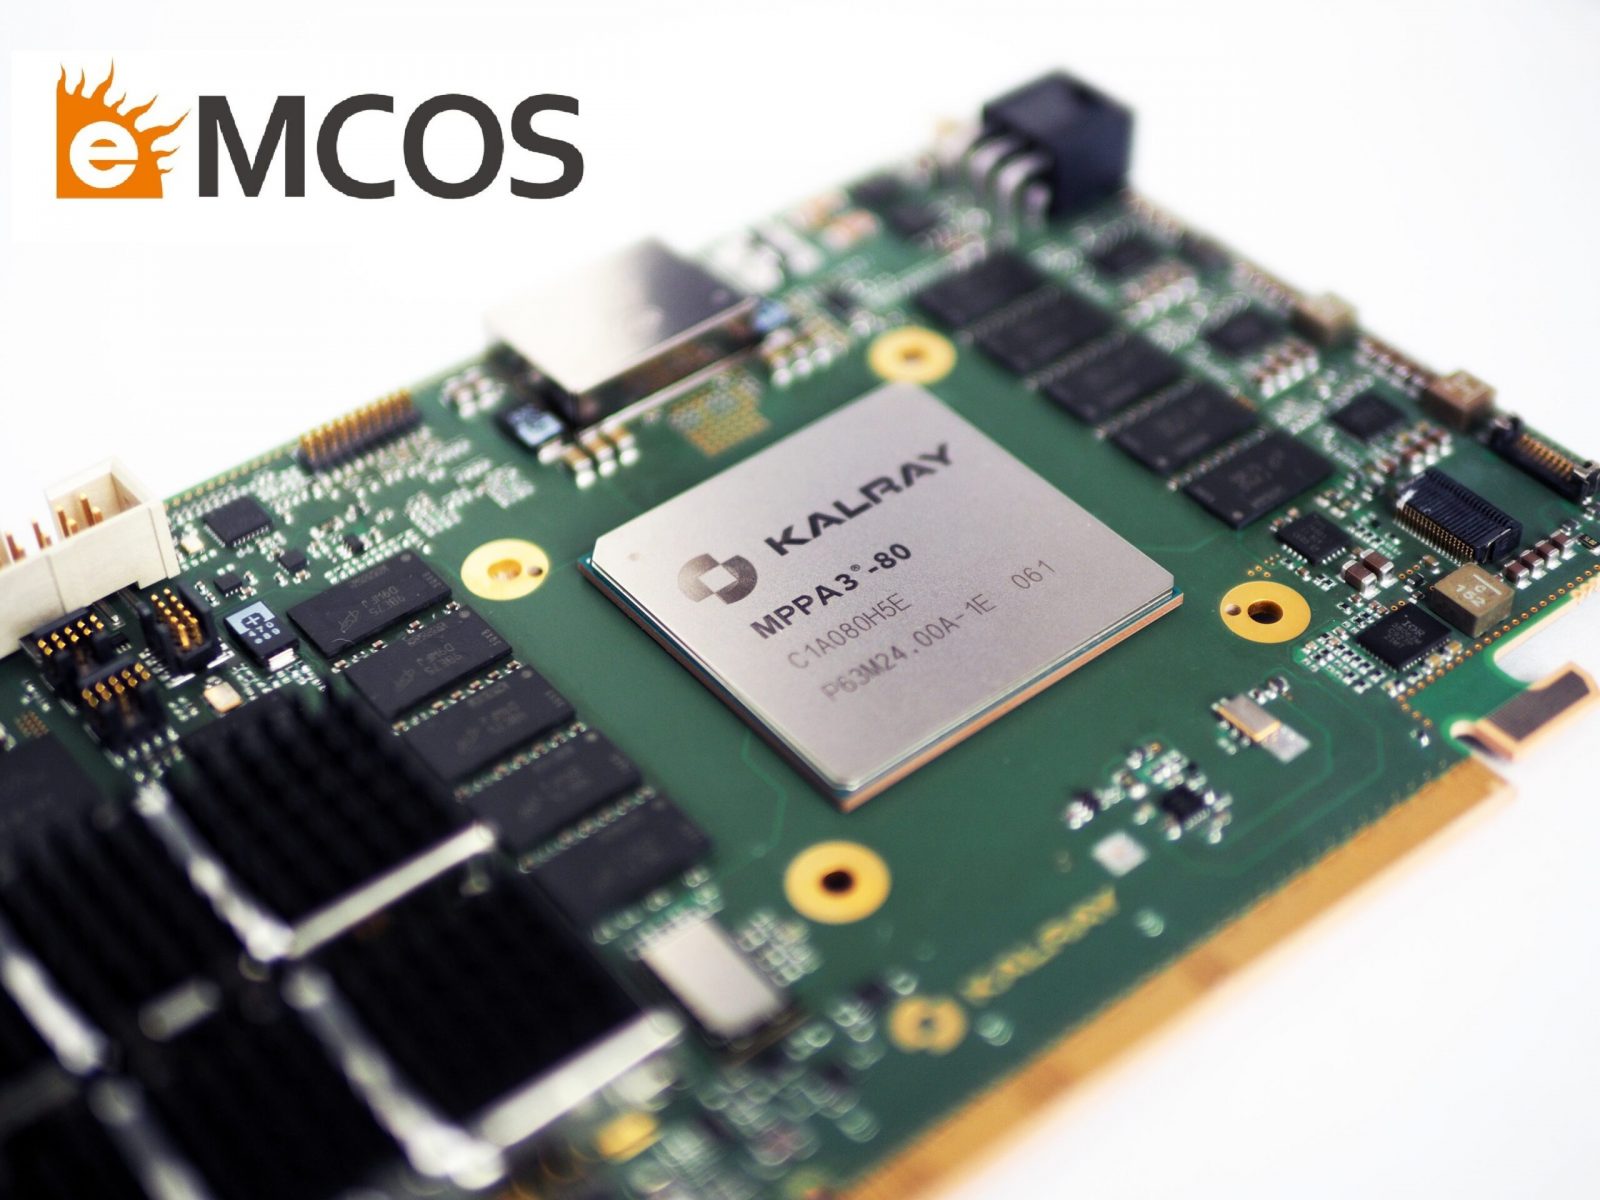 EMCOS®-POSIX-COMMERCIAL-OS-SUPPORTS-KALRAYS-COOLIDGE™-INTELLIGENT-PROCESSOR-FOR-MIXED-CRITICALITY-SYSTEMS1